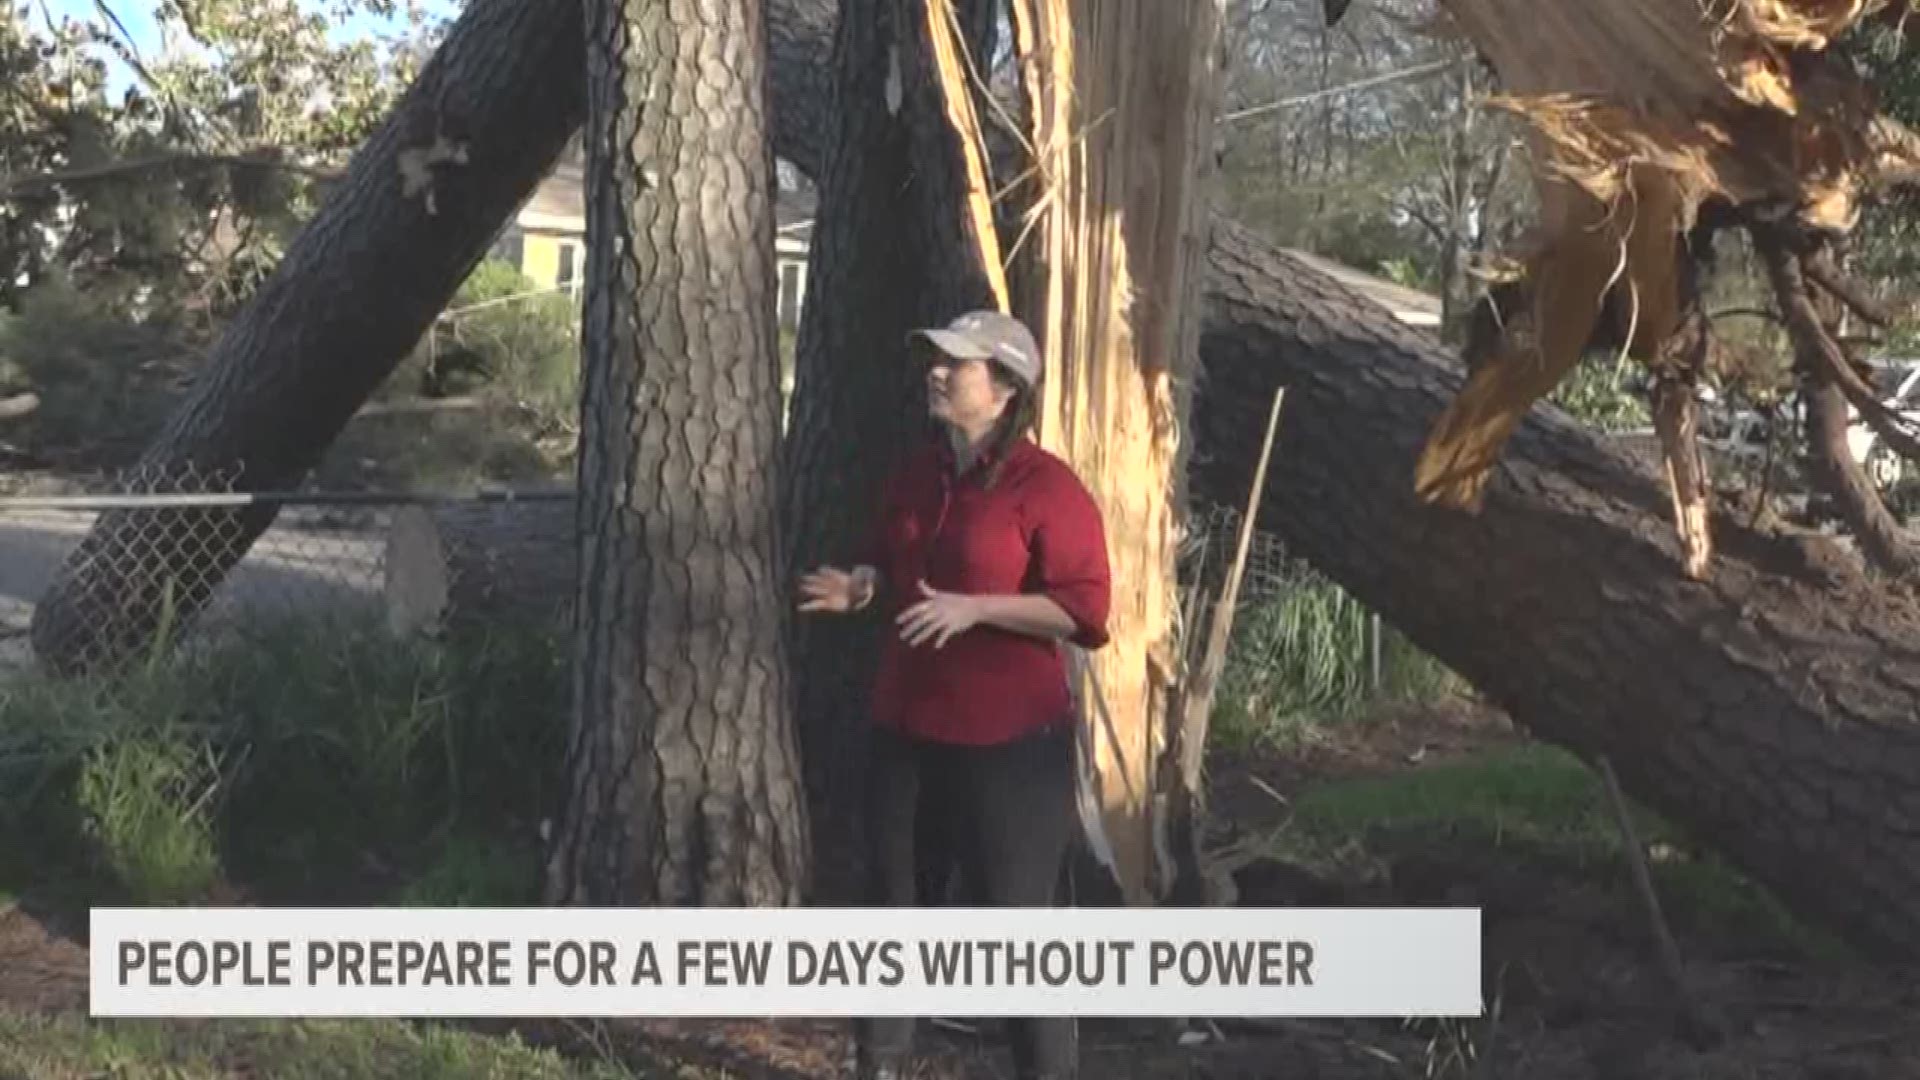 People in Kilgore are preparing for days without power